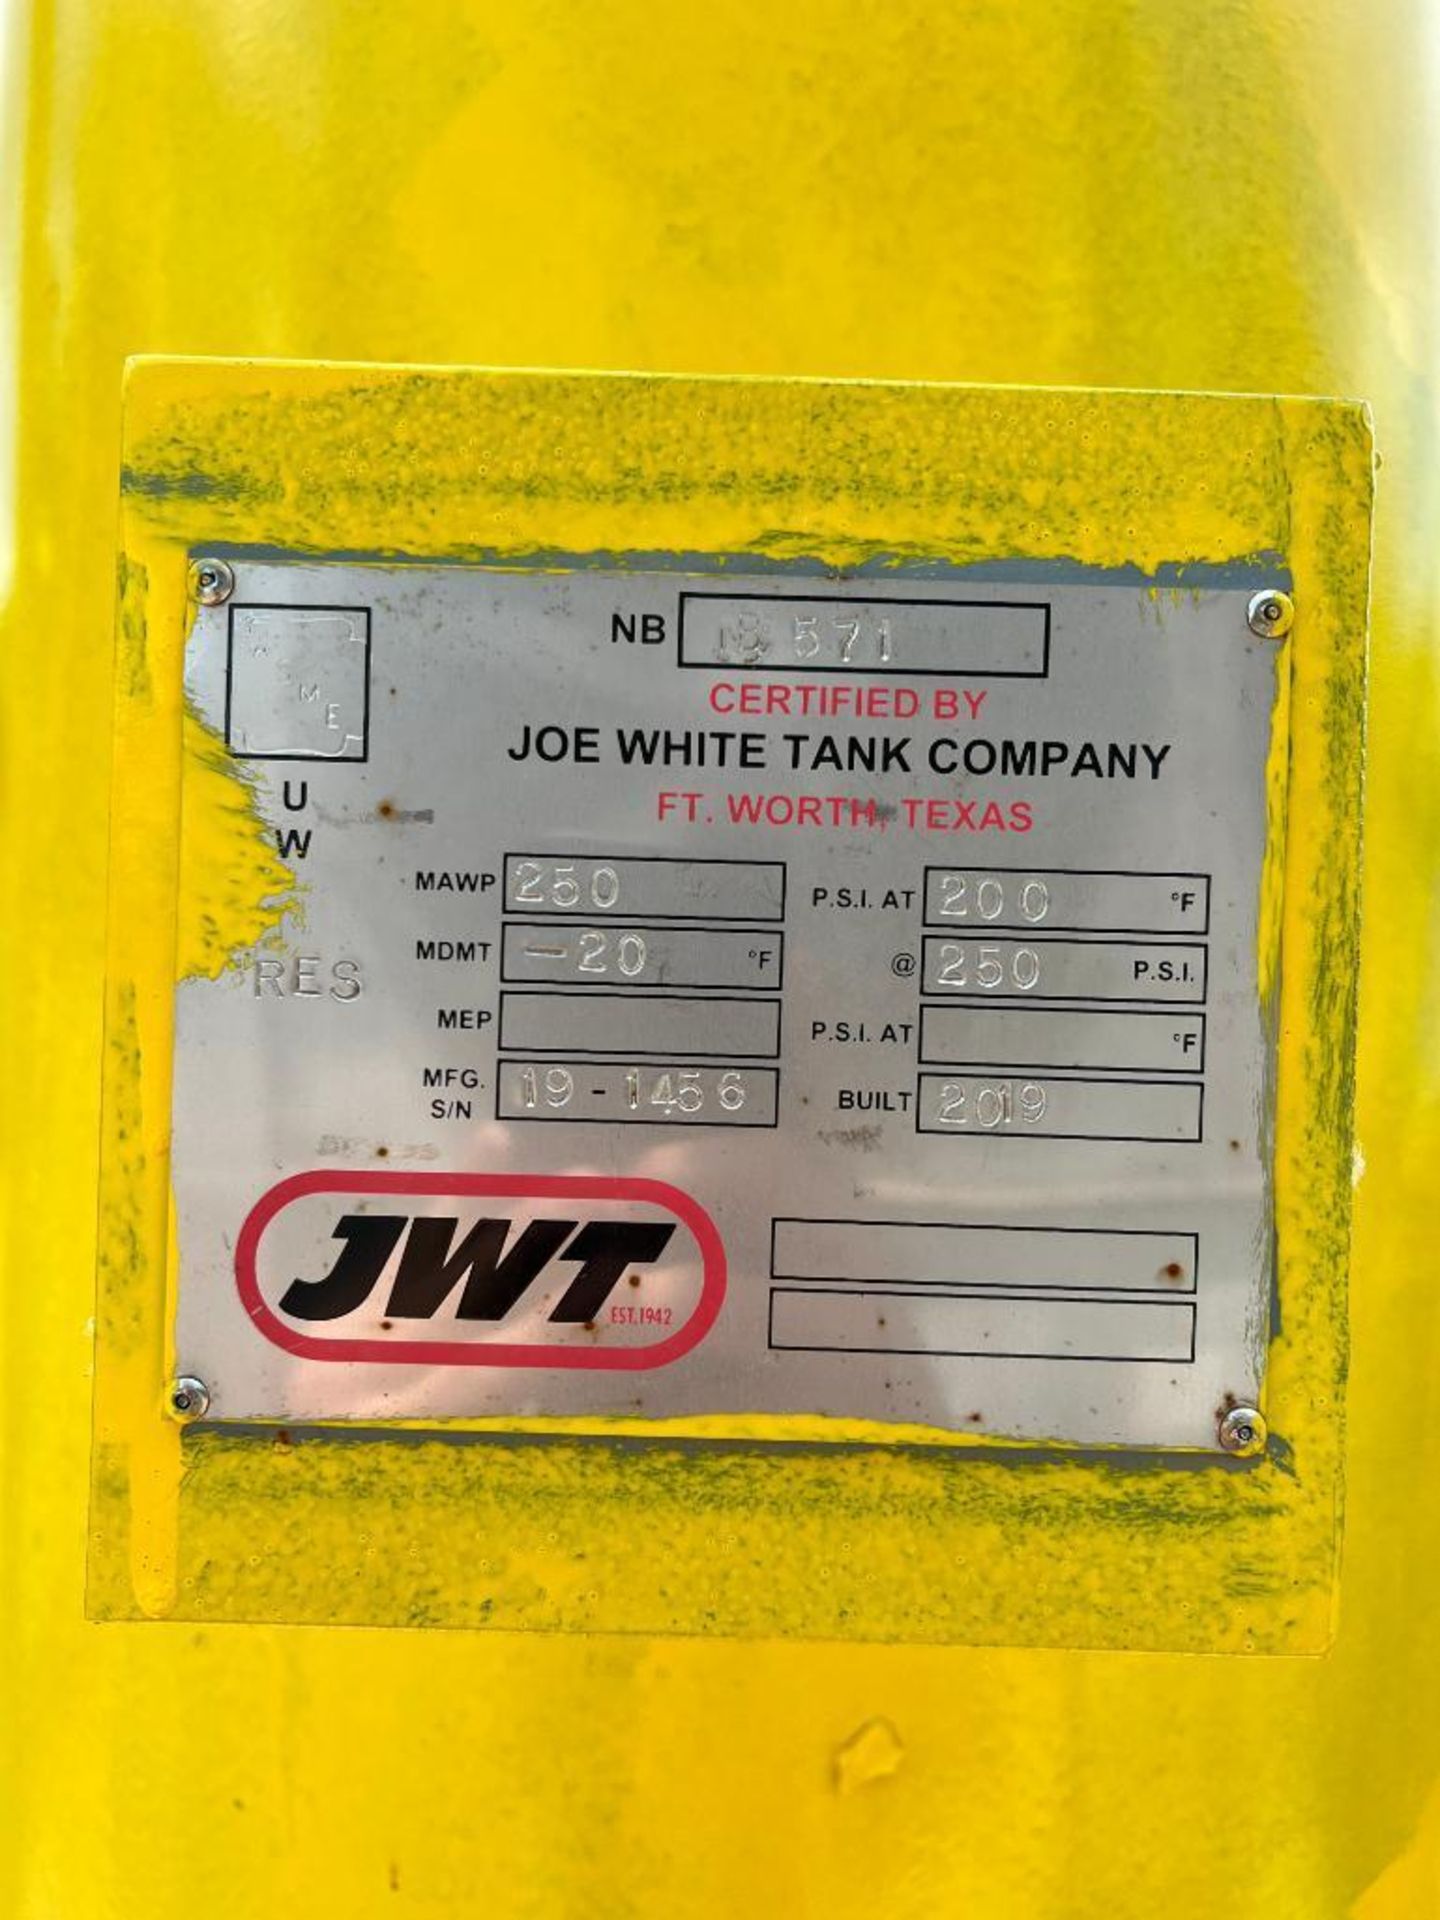 2019 Joe White Tank Company 250 PSI Air Receiver, S/N: 19-1456 with (2) Parker Float Tanks - Image 3 of 4